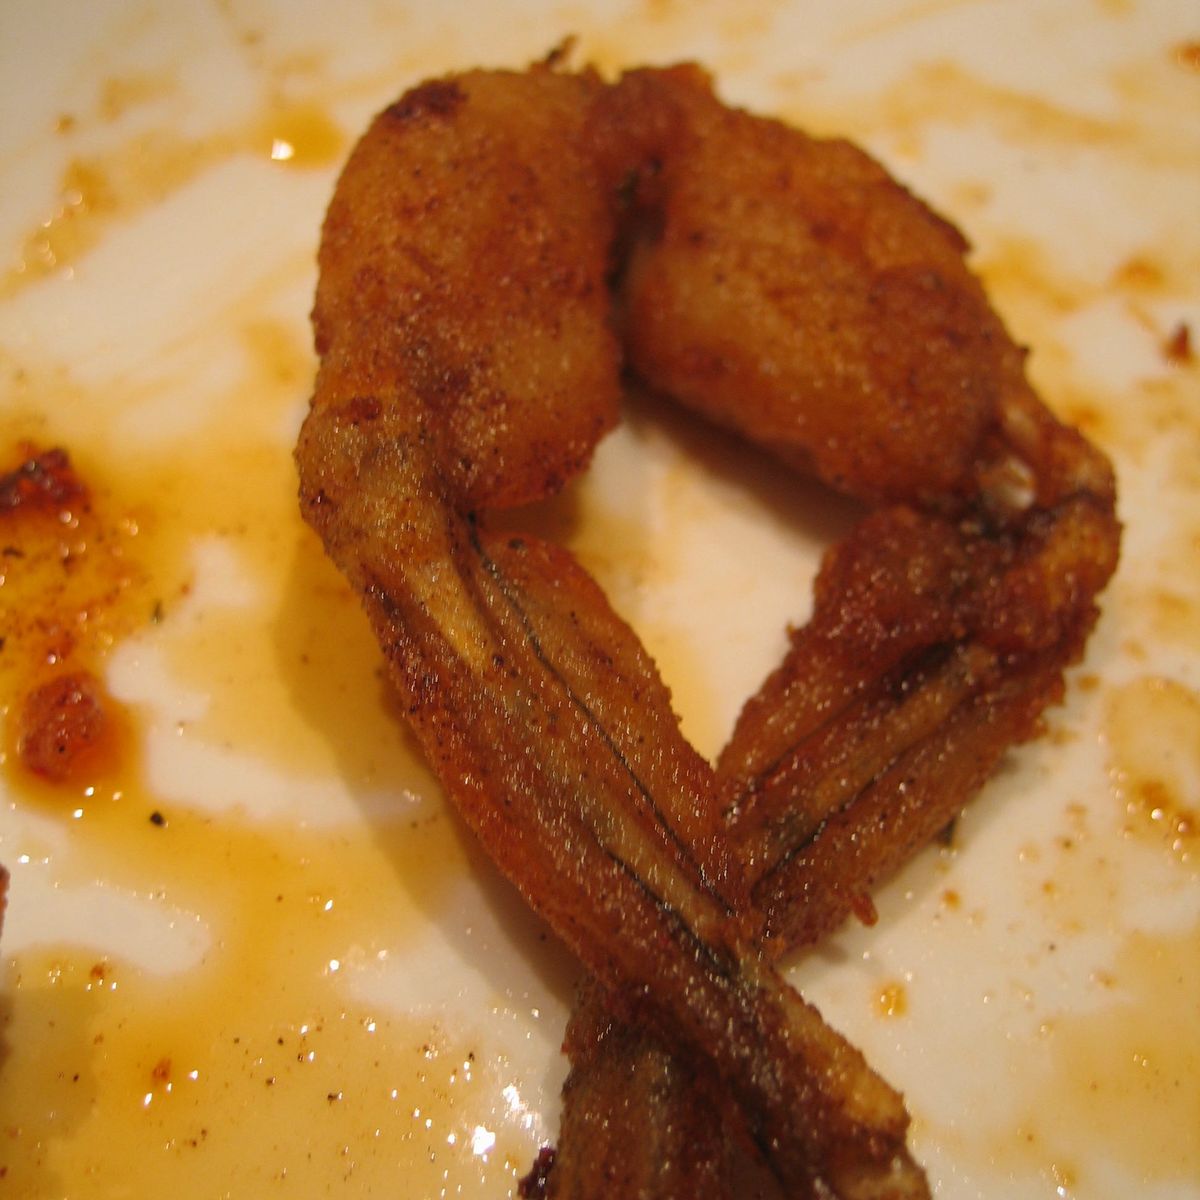 Best Sauteed Frog Legs Recipe - How To Make Frog Legs with Chubritza